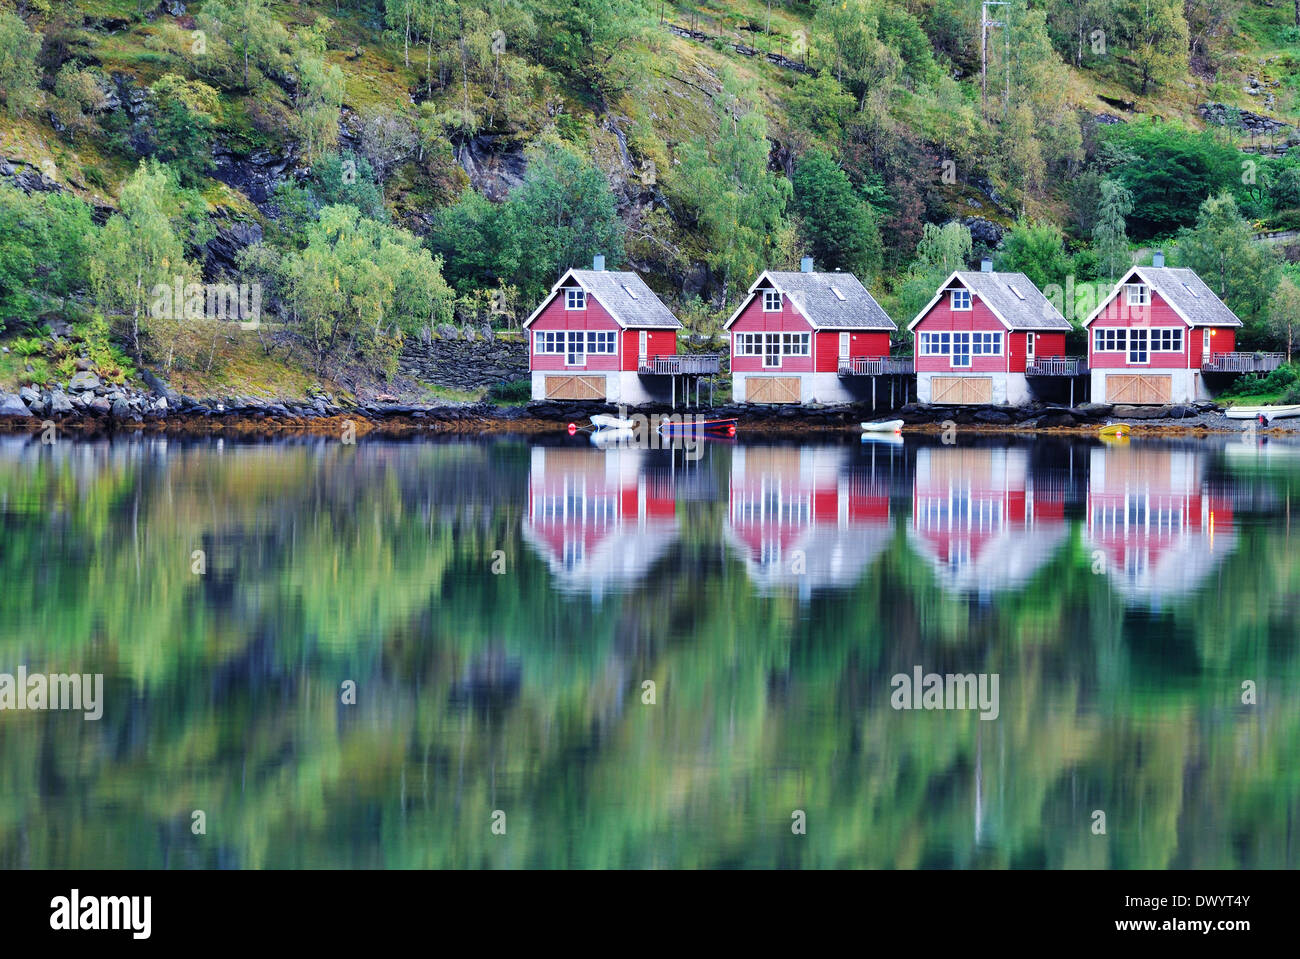 Scenery in Flam Norway, Fishermen hut and reflection. Stock Photo